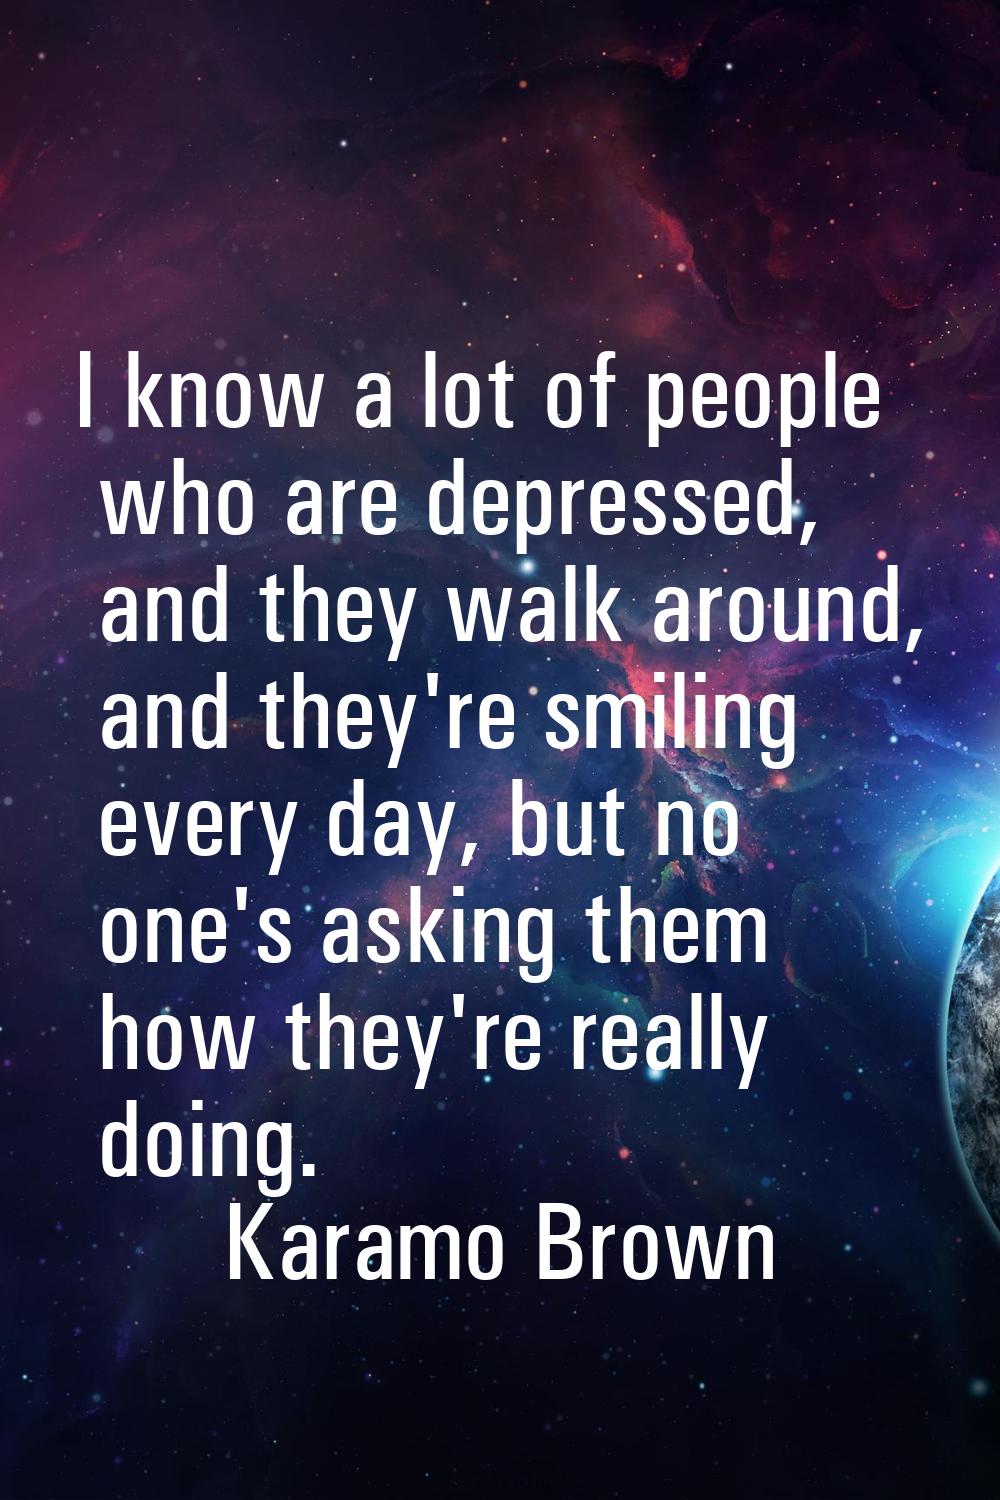 I know a lot of people who are depressed, and they walk around, and they're smiling every day, but 